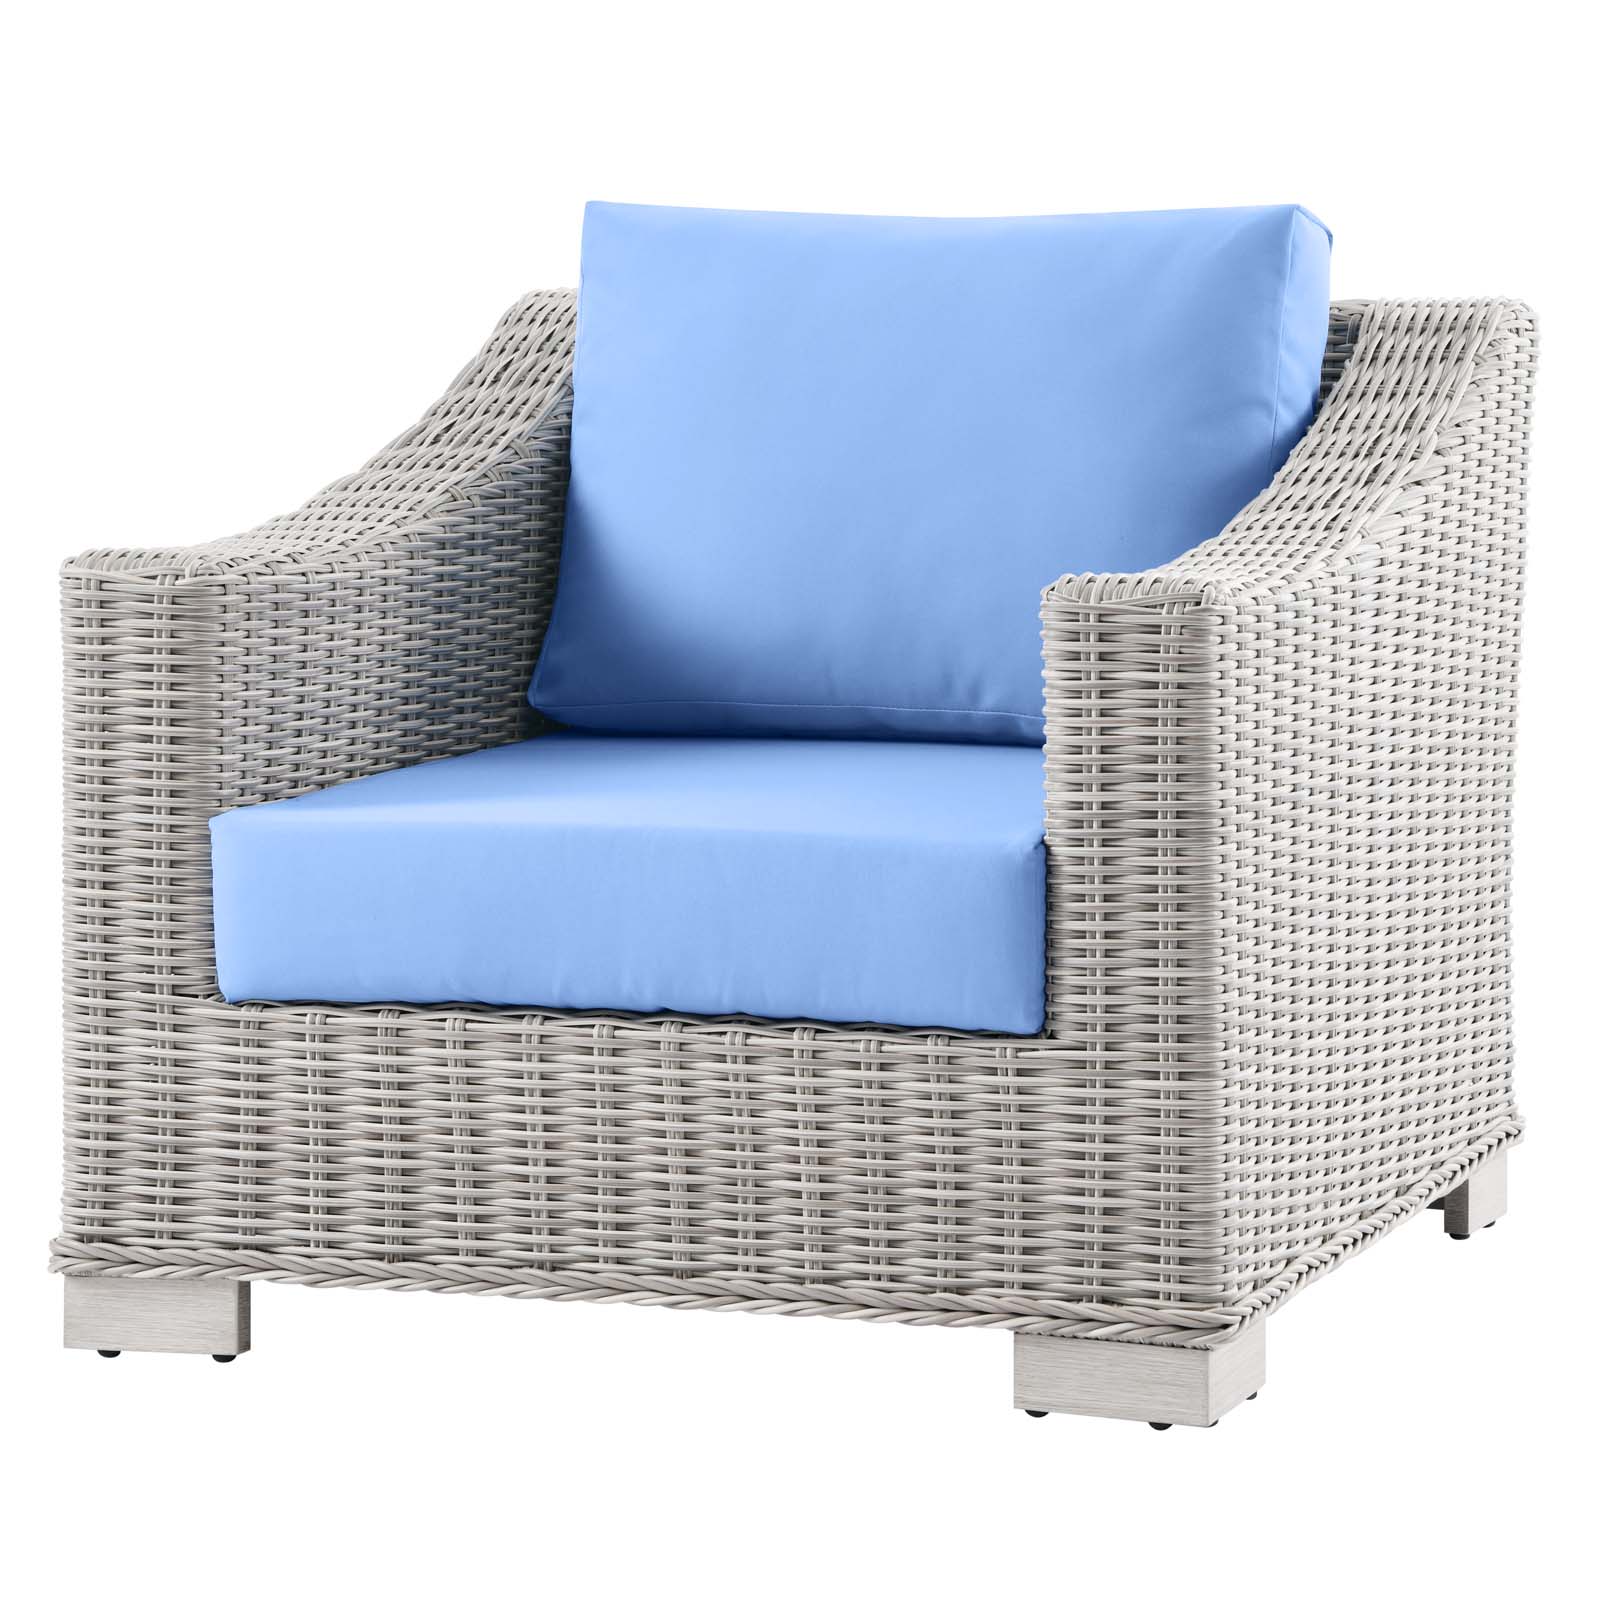 Lounge Sectional Sofa Chair Table Set, Rattan, Wicker, Light Grey Gray Light Blue, Modern Contemporary Urban Design, Outdoor Patio Balcony Cafe Bistro Garden Furniture Hotel Hospitality - image 3 of 10